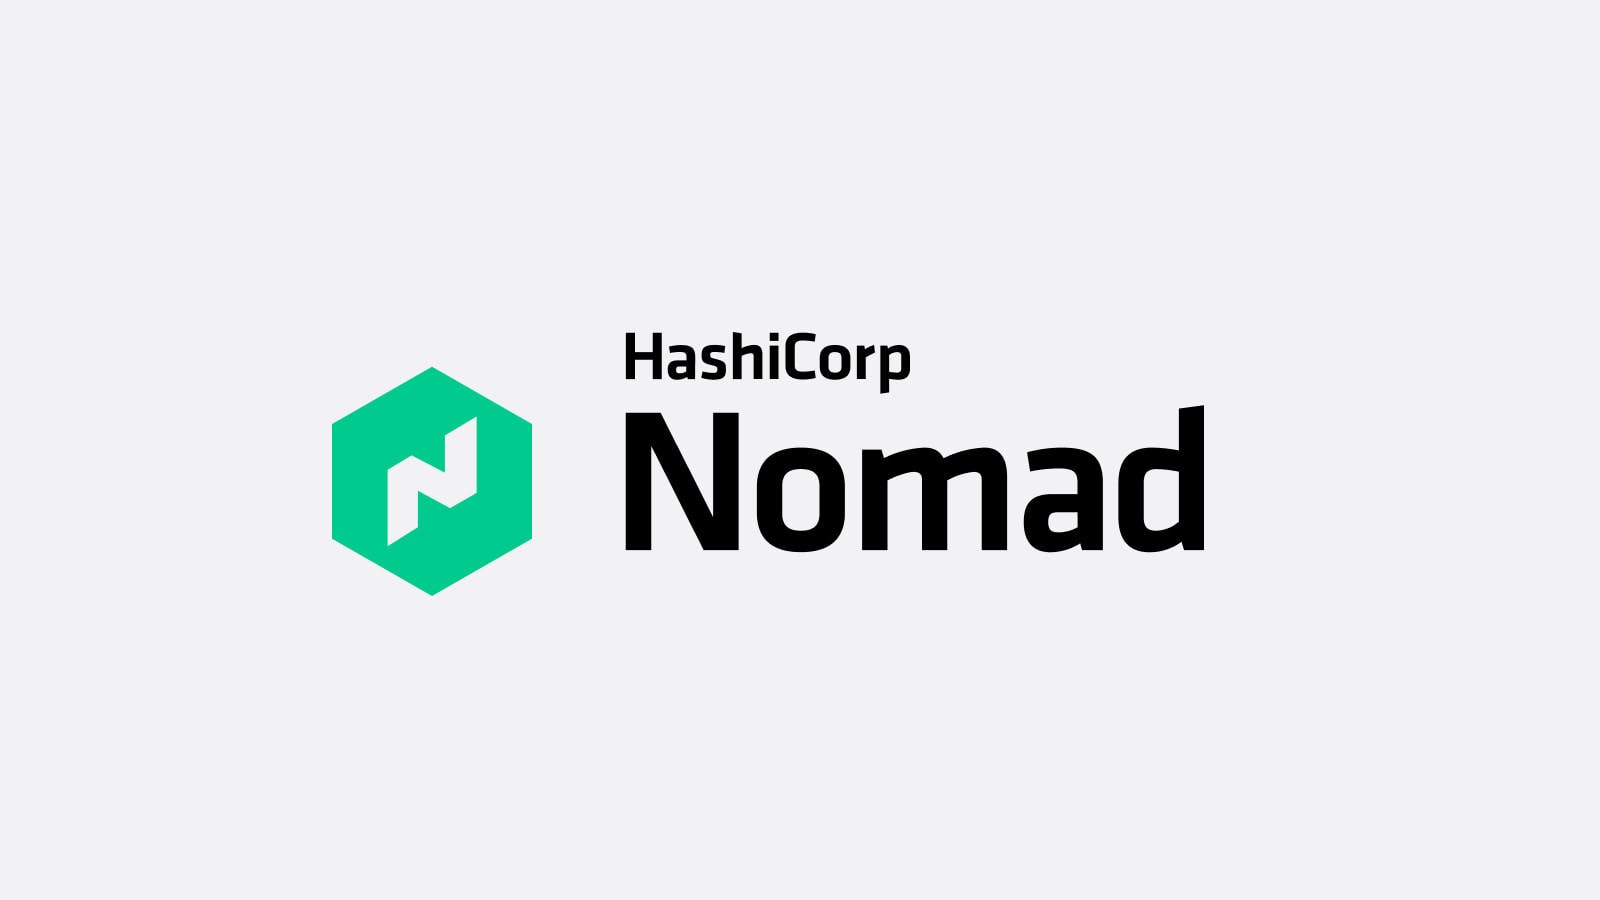 HashiConf Digital June 2020: Nomad News in Review